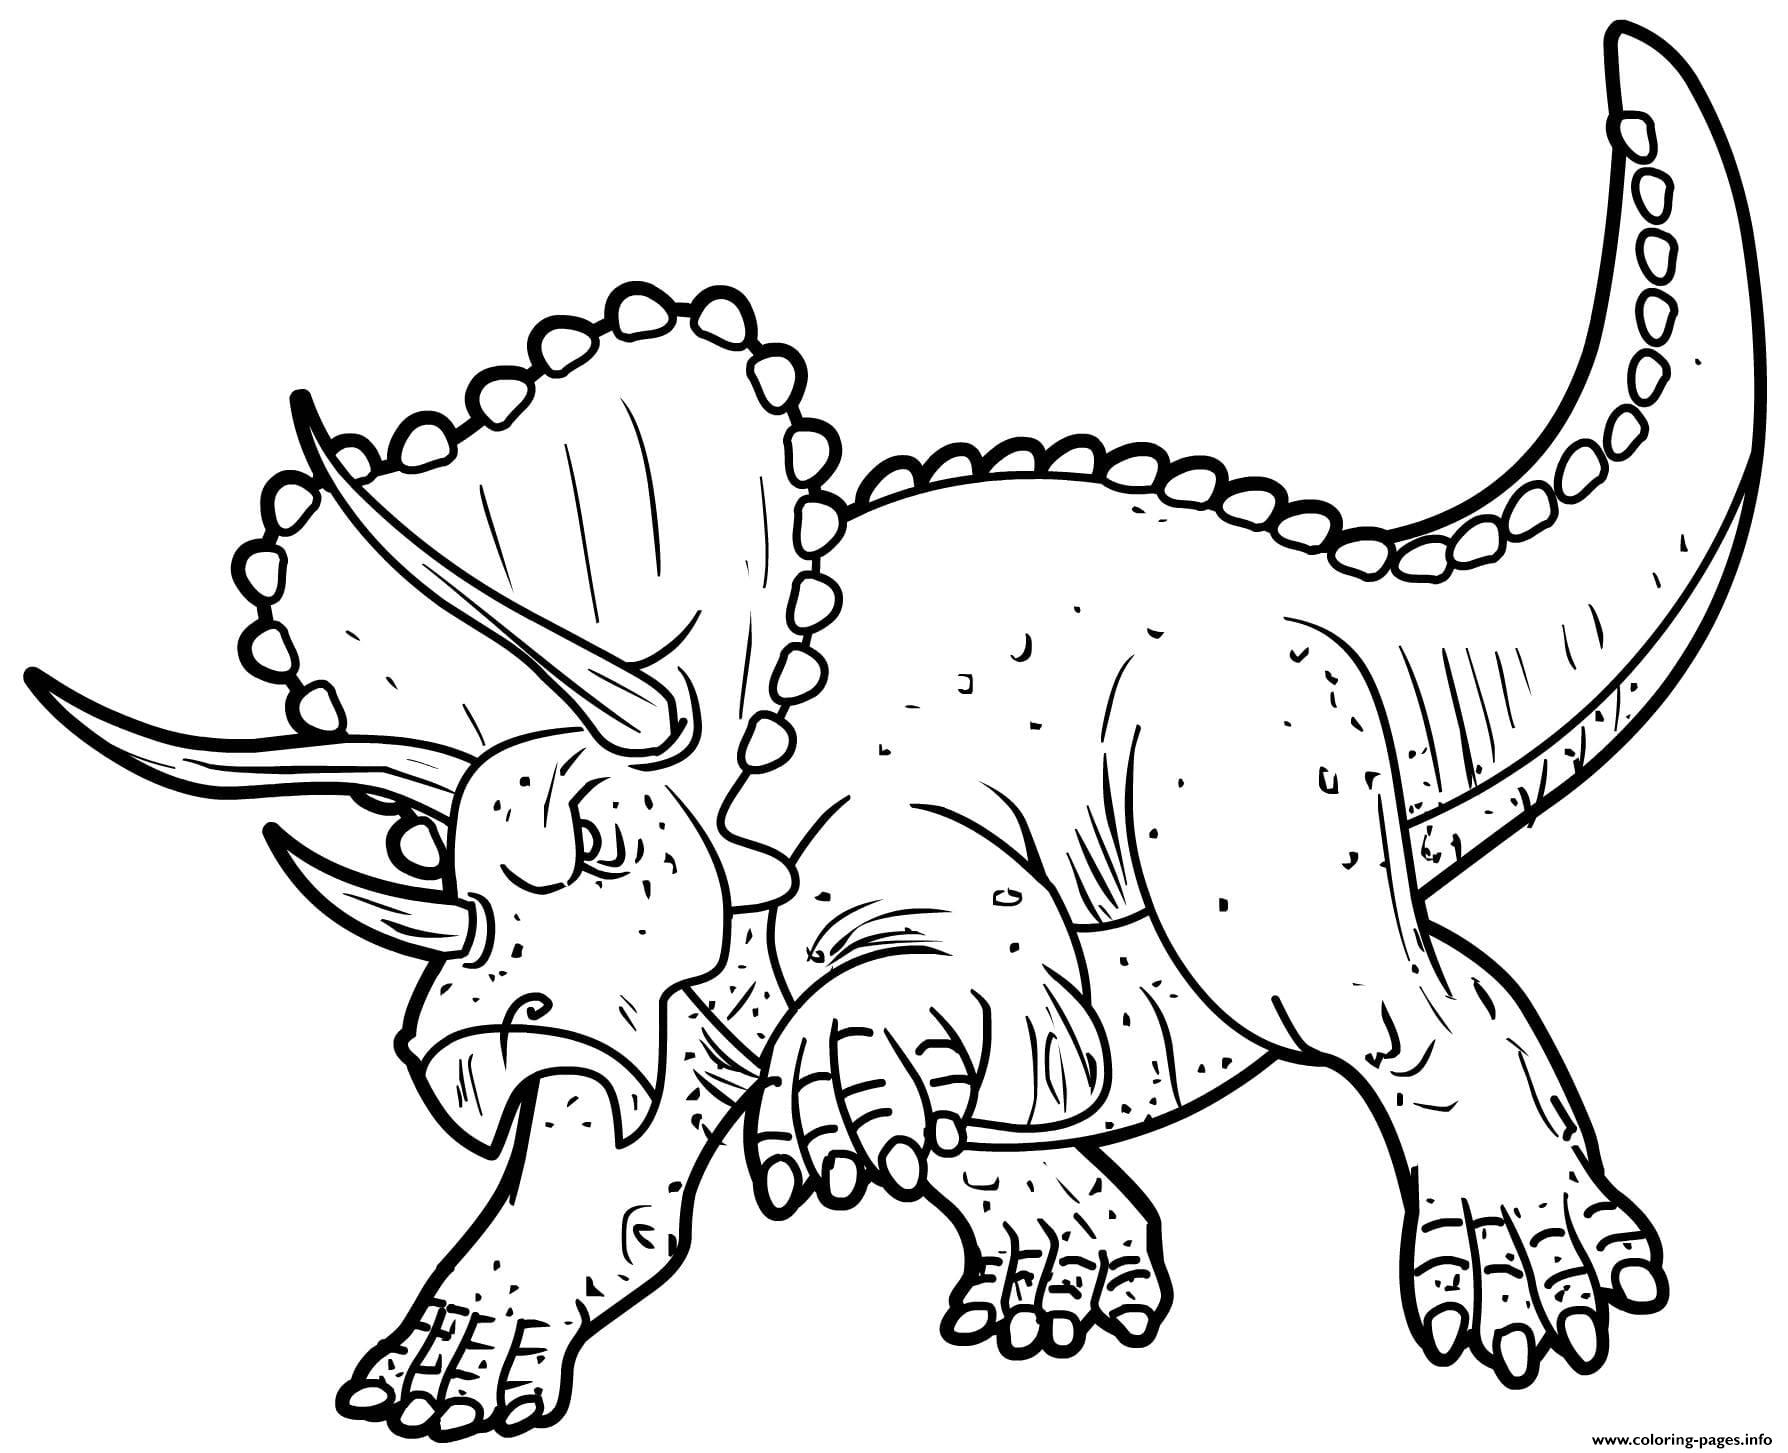 Triceratops Pissed Off coloring